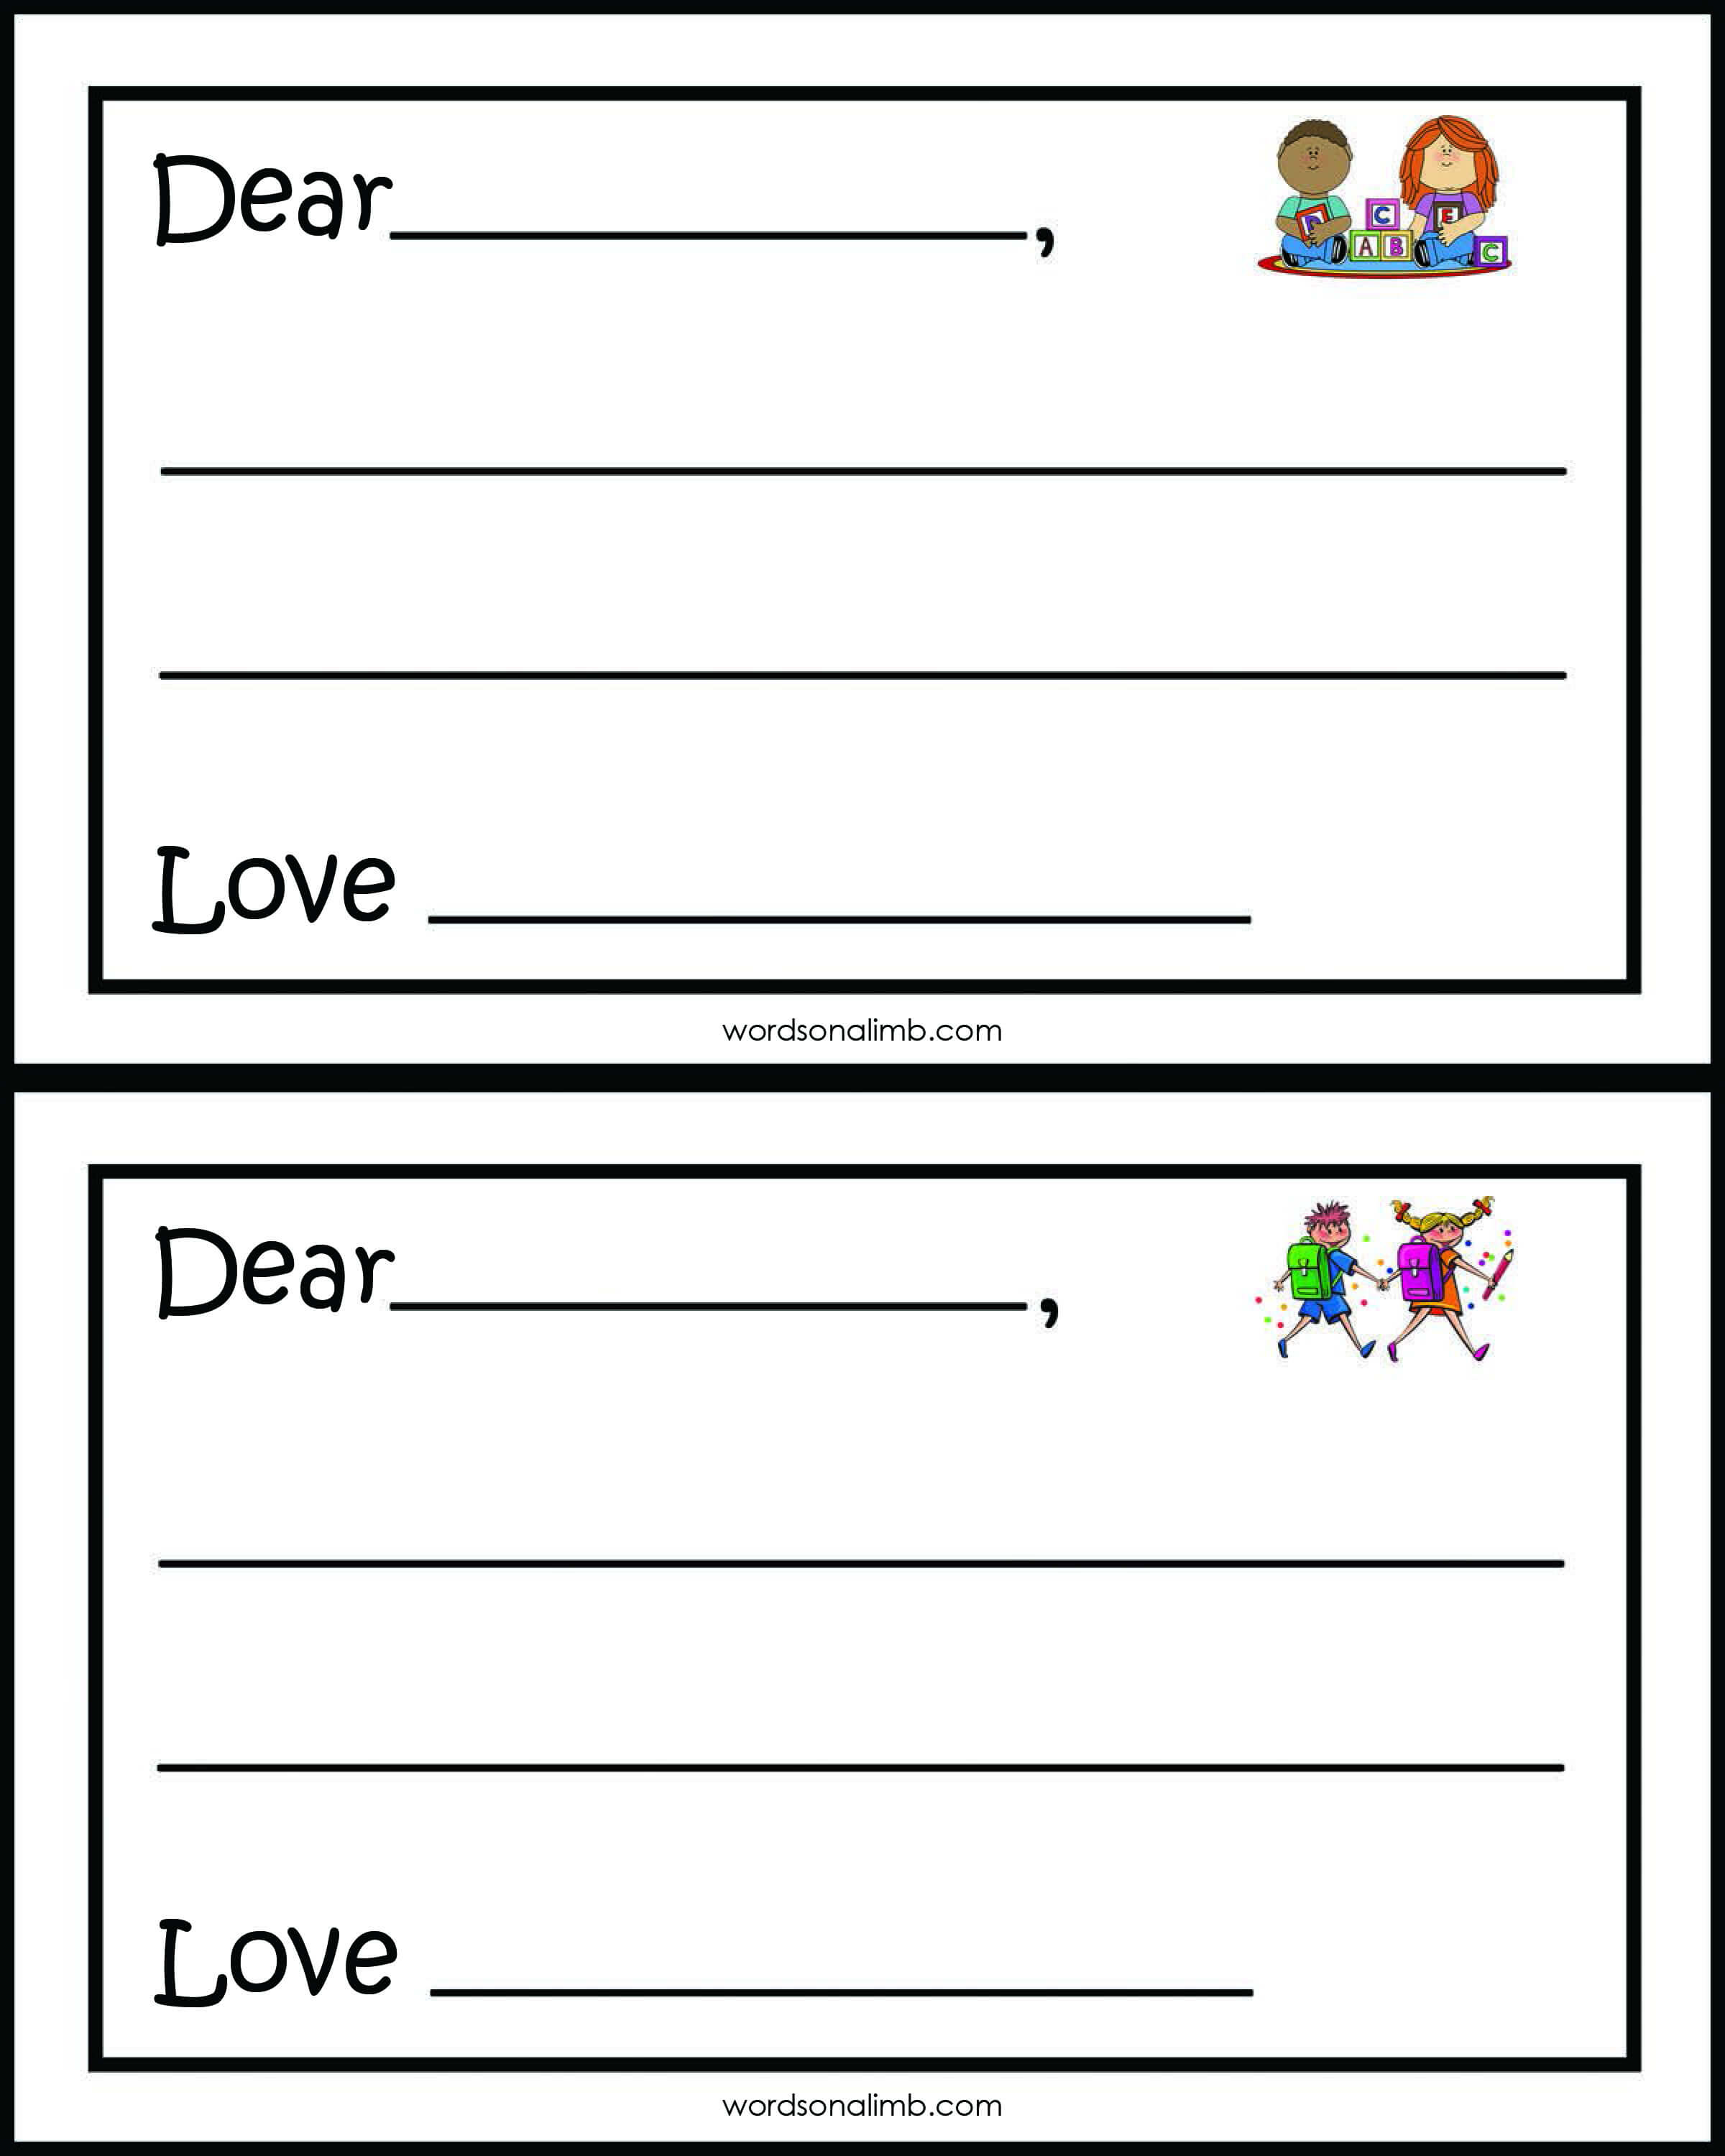 25 Images Of Cue Cards Template | Bfegy With Regard To Cue Card Template